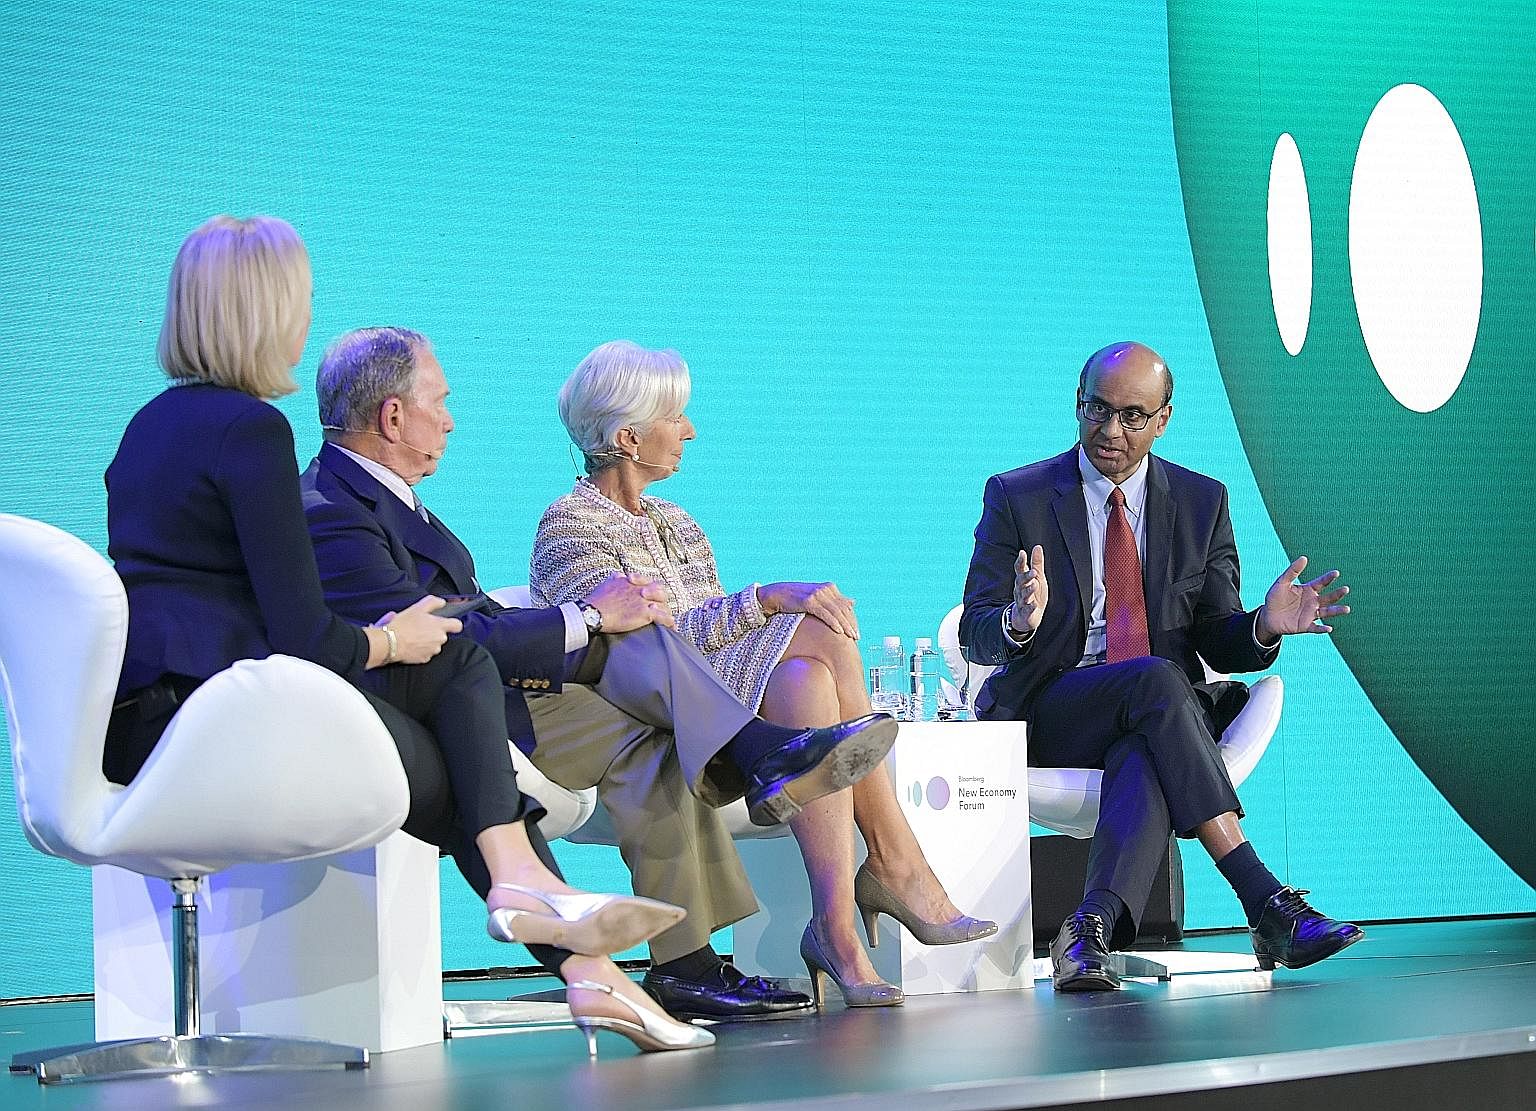 Deputy Prime Minister Tharman Shanmugaratnam sharing his views at a panel discussion yesterday at the Bloomberg New Economy Forum. With him are (from left) moderator and Bloomberg TV editor-at-large Francine Lacqua, former New York mayor Michael Bloo